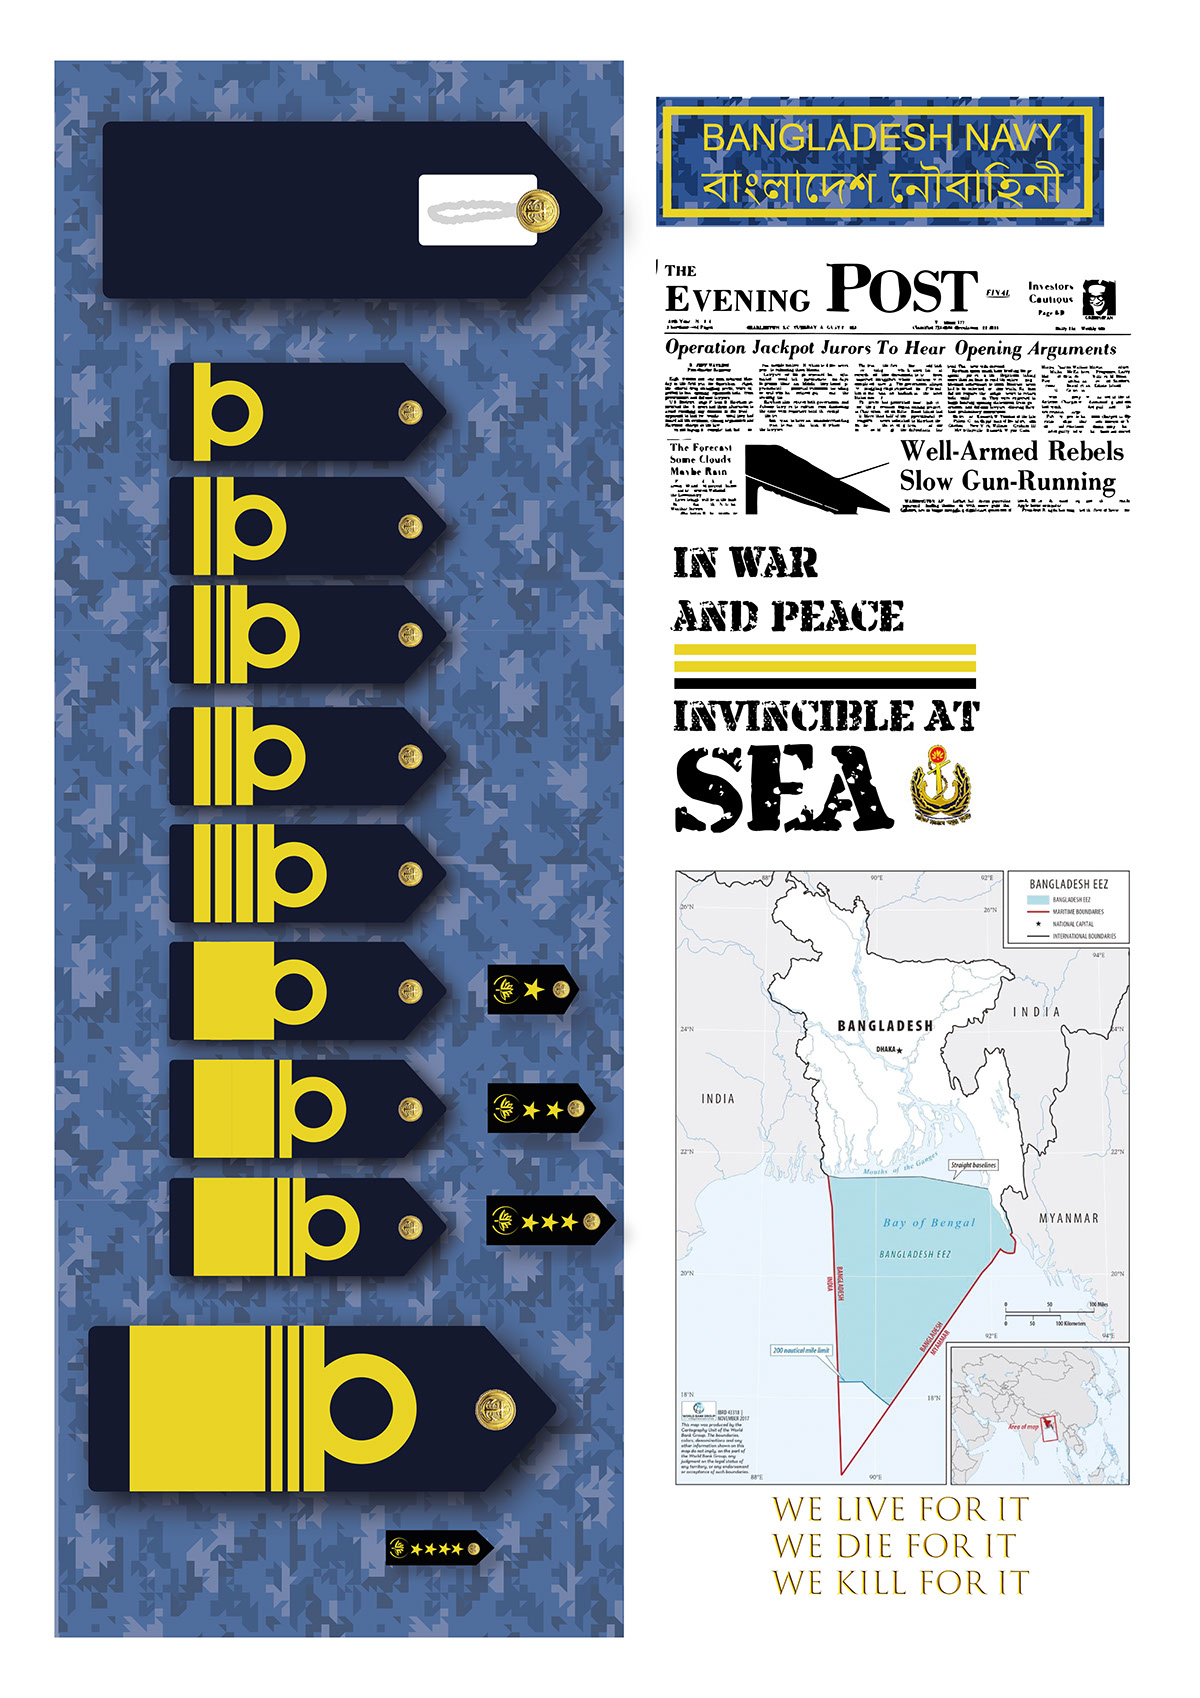 Naval Insignia Ranks and Epaulettes rendition image